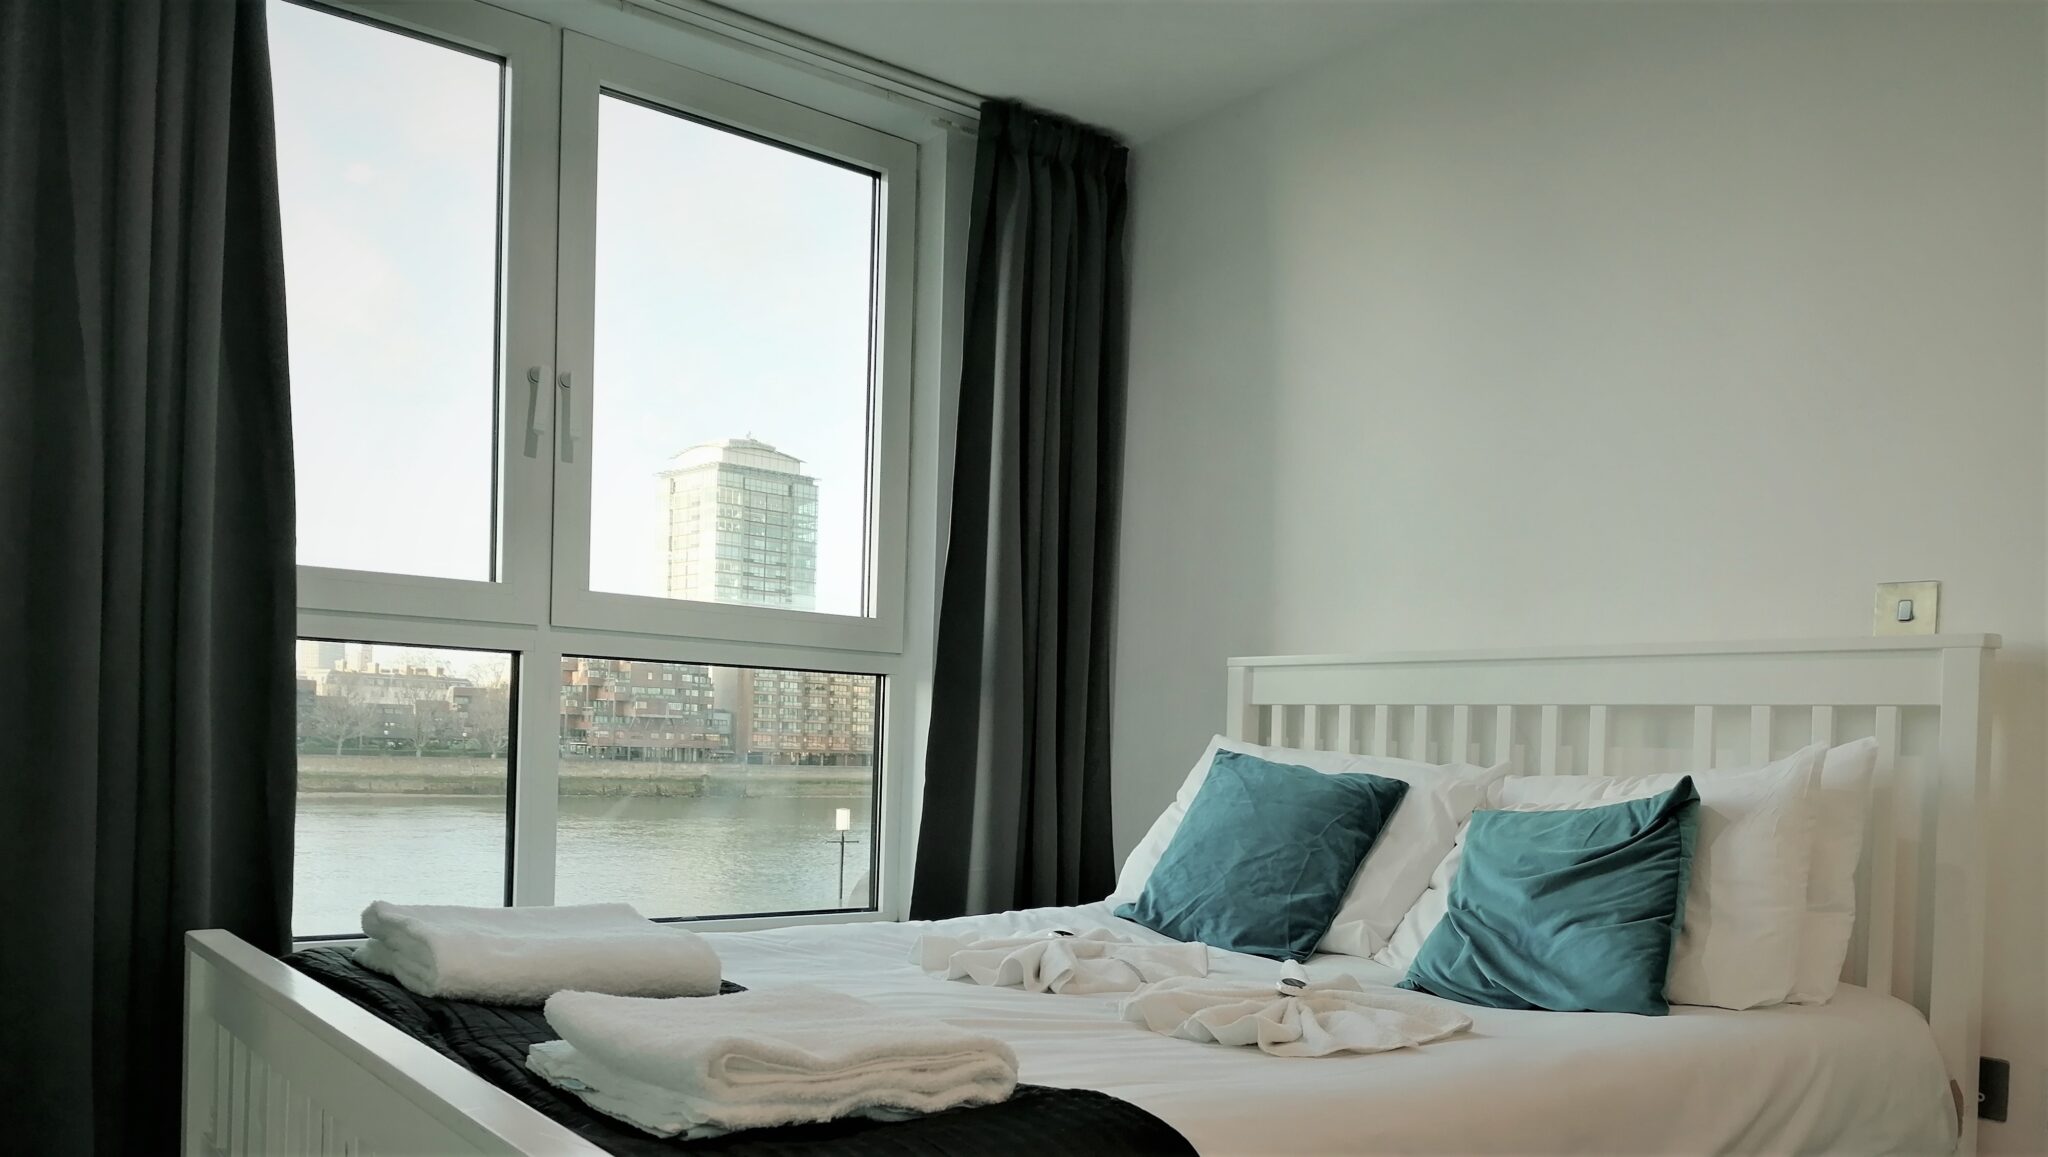 Discovery Dock East Apartments - East London Serviced Apartments - London | Urban Stay